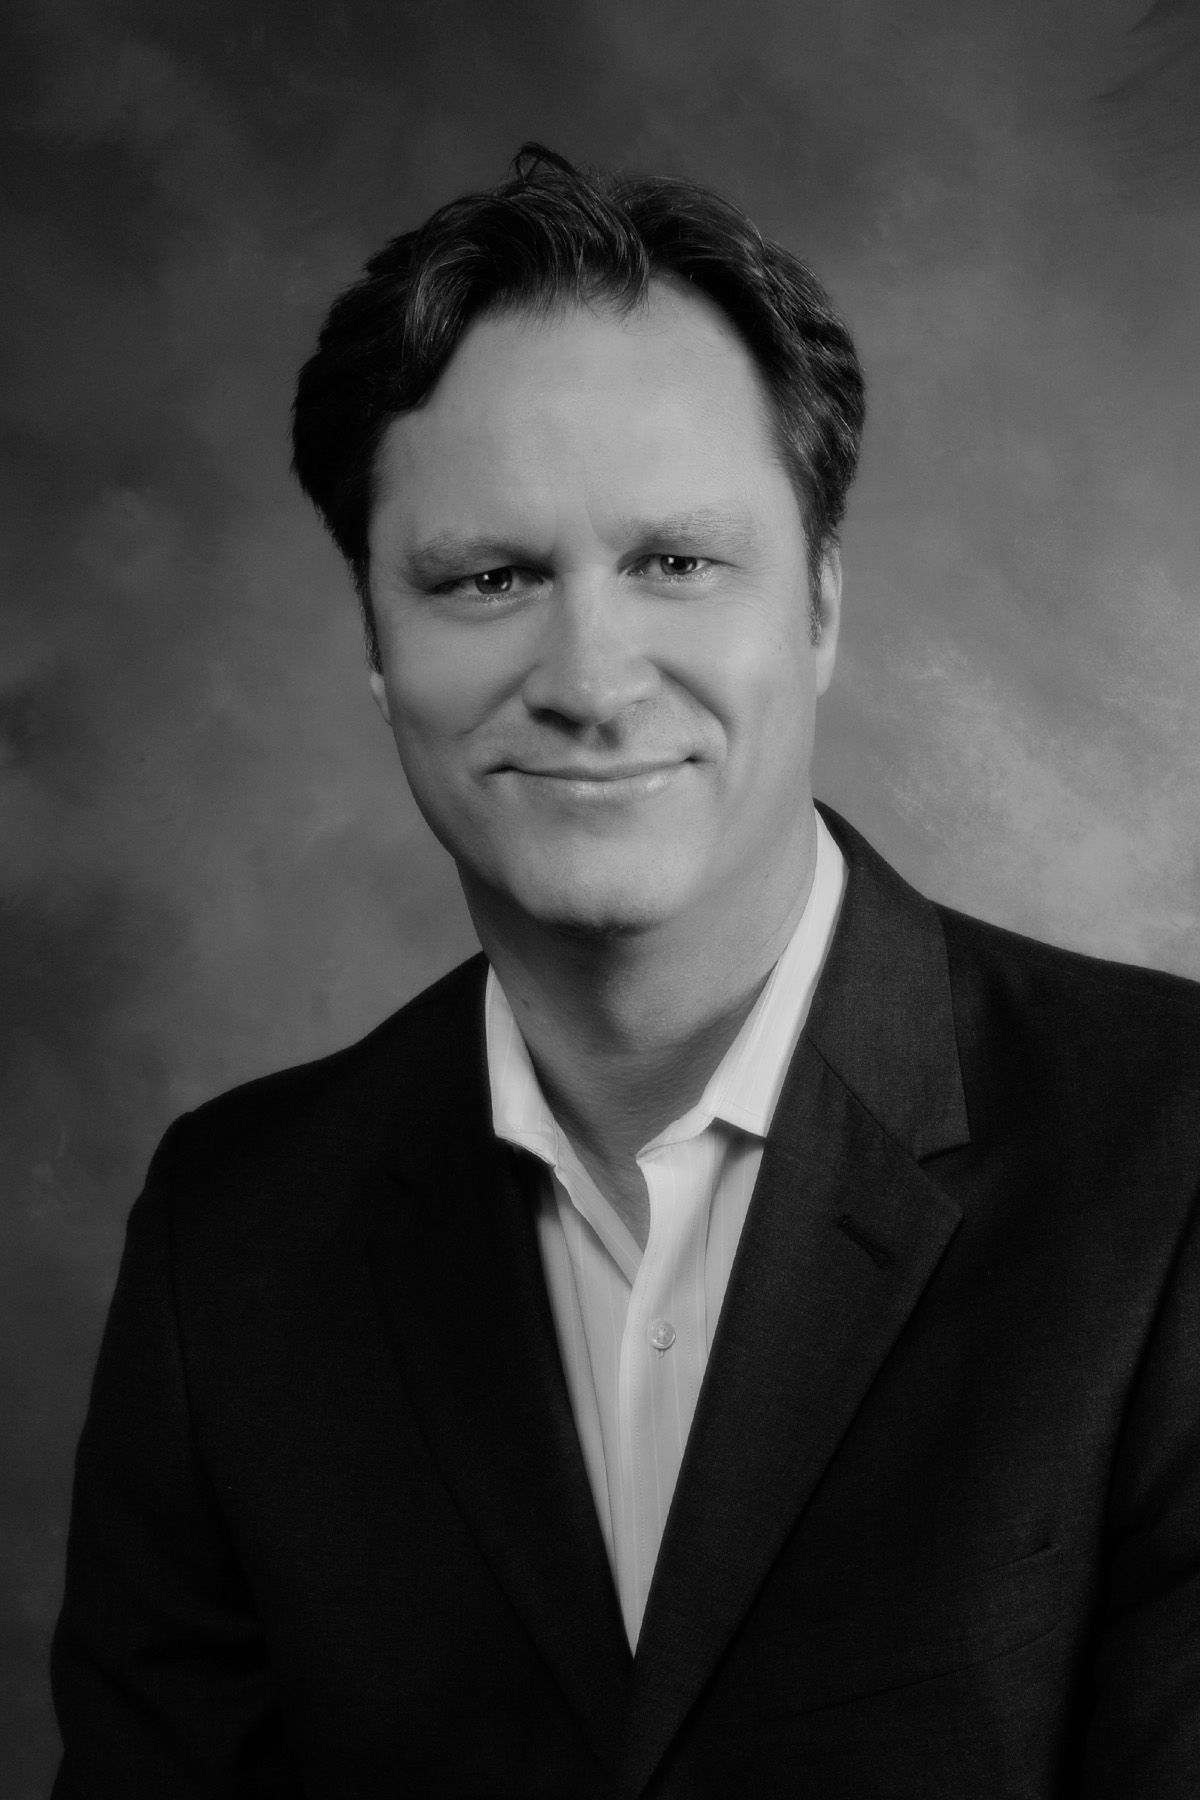 A man in a suit and white shirt is smiling in a black and white photo.